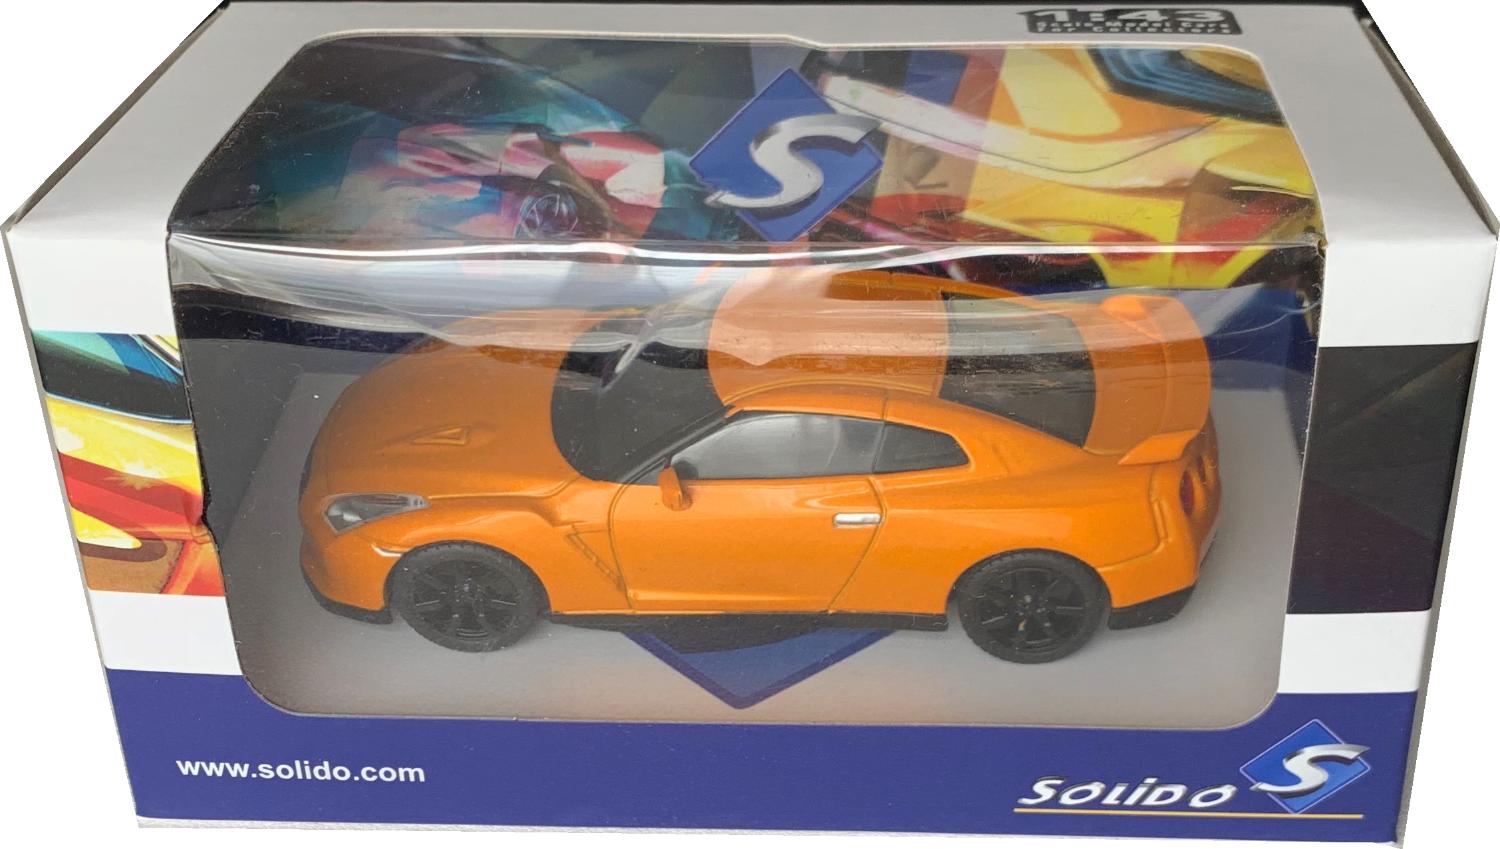 Nissan GT-R 2007 in orange 1:43 scale model from Solido